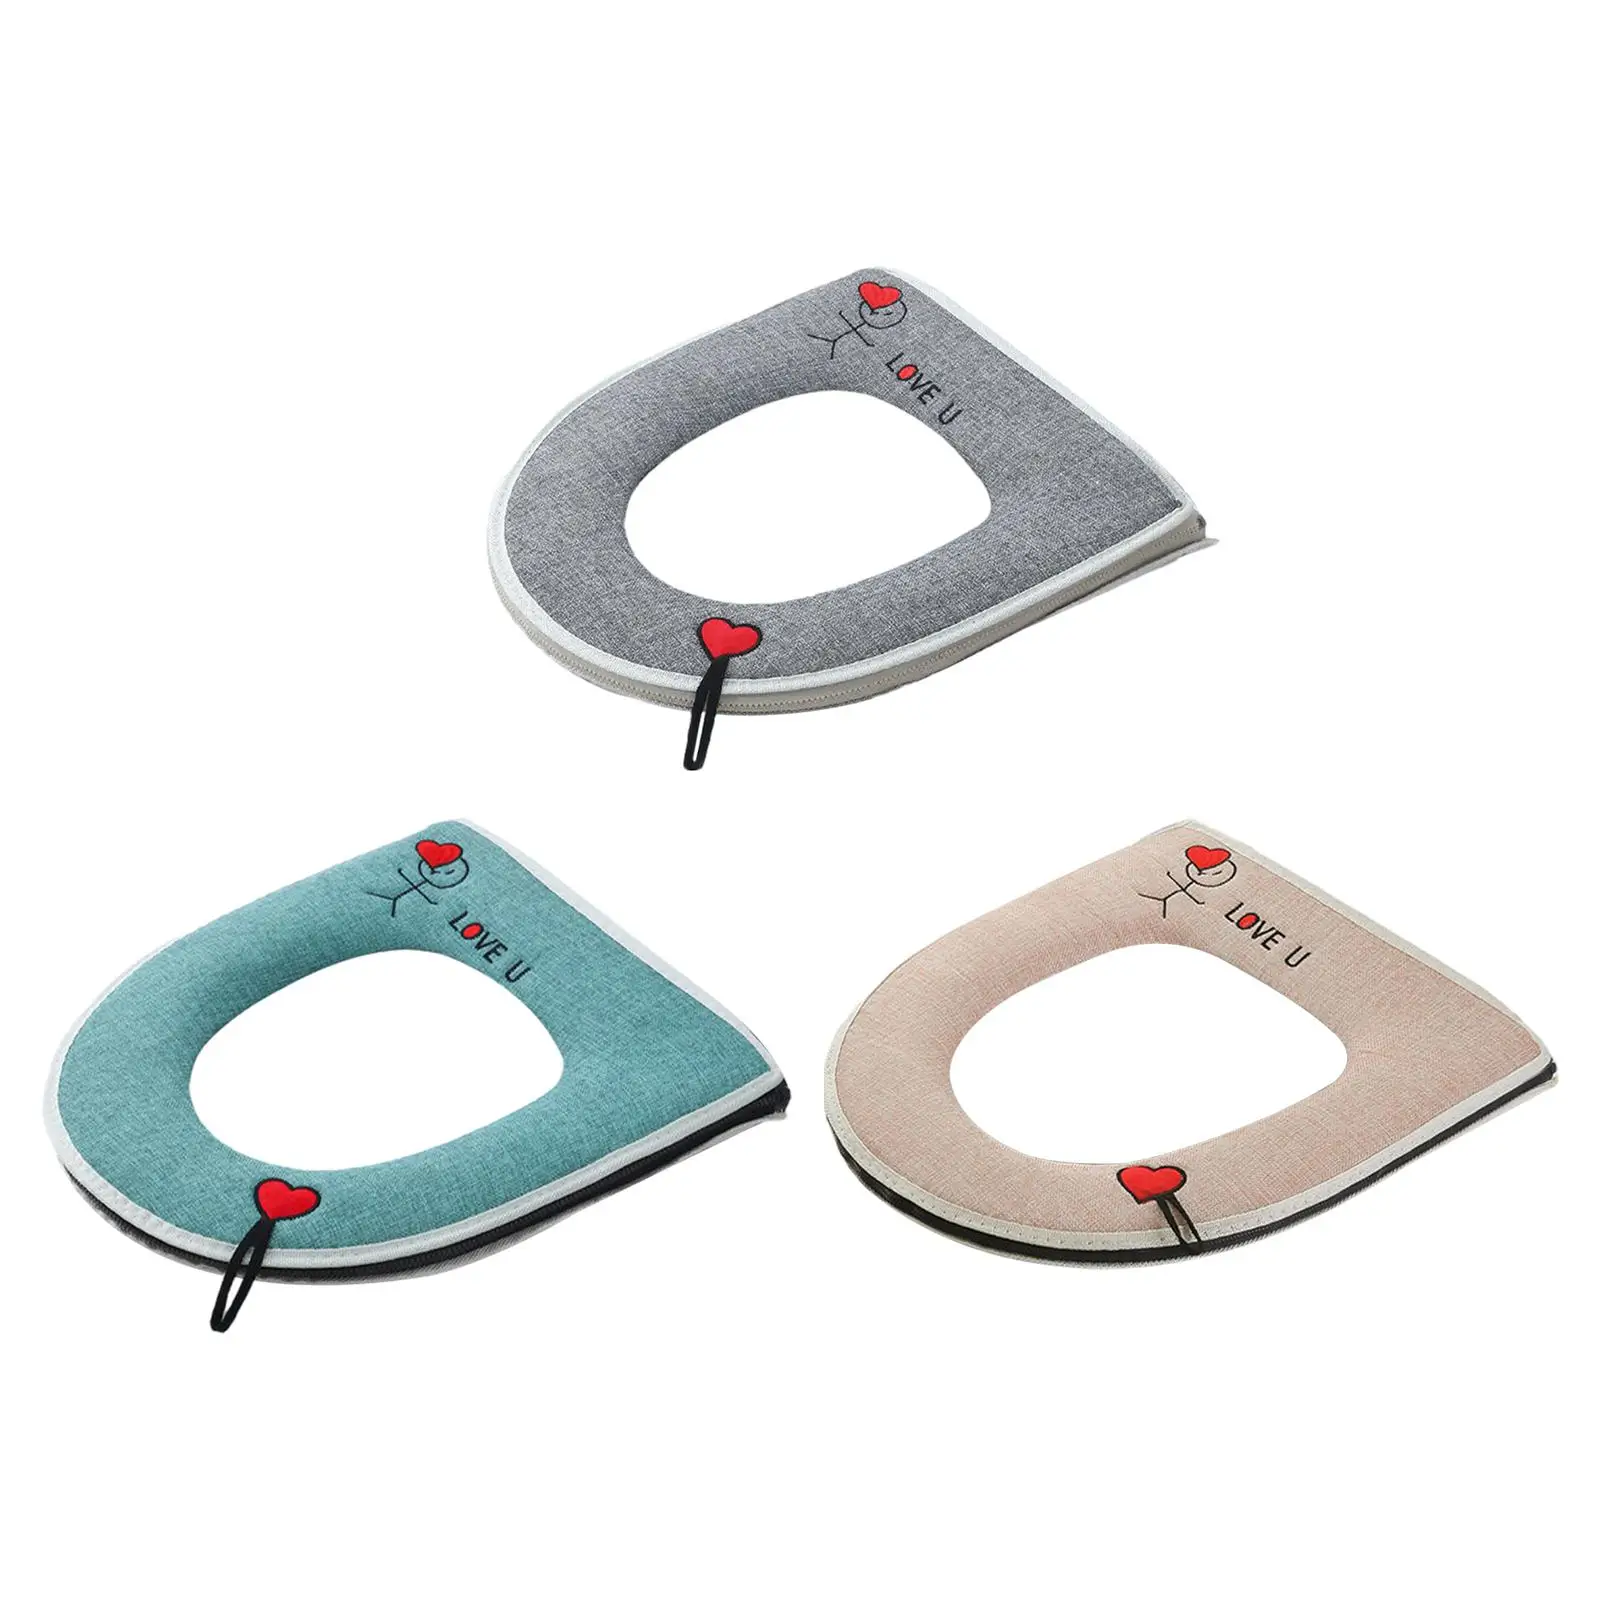 Thicken Toilet Seat Cushion Foldable Universal Toilet Seat Mat Warm Toilet Seat Covers for Bathroom Traveling Household Home